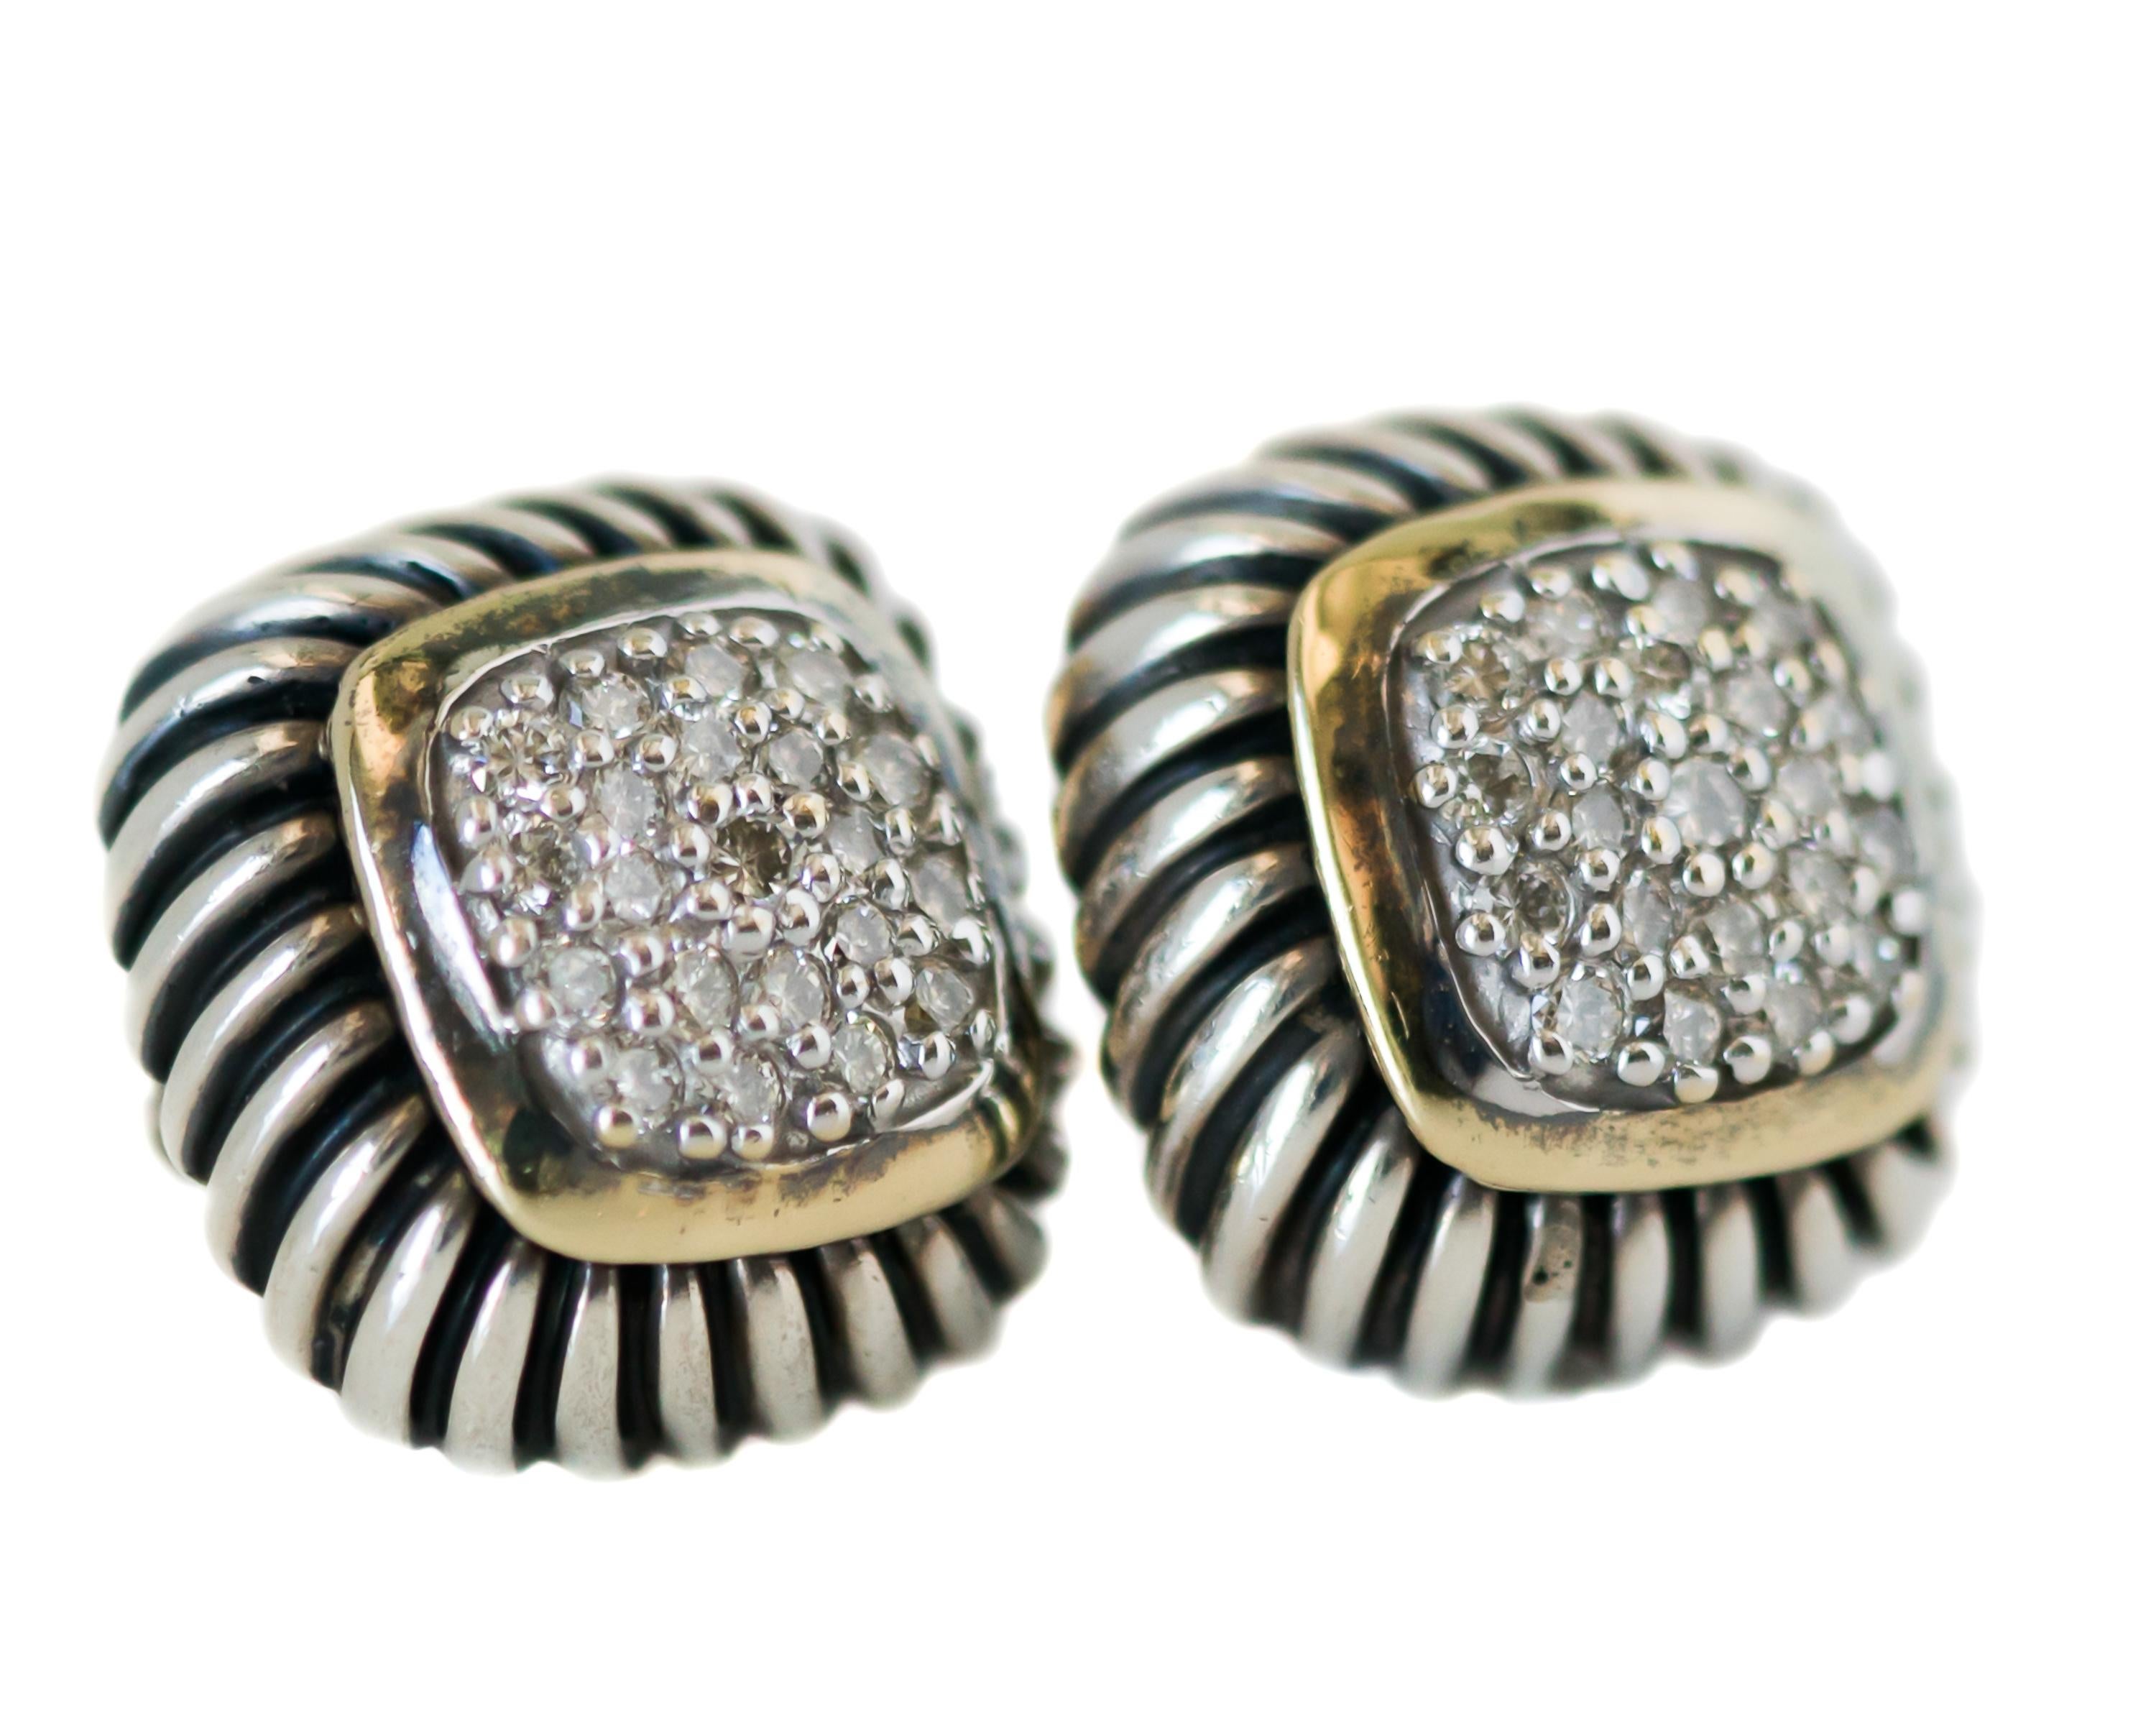 1990s David Yurman Cable Stud Earrings - 18 Karat Yellow Gold, Sterling Silver, Diamonds

Features:
Pave Diamond Center
18 Karat Yellow Gold Bezel setting 
Sterling Silver Cable Frame and earring back
Earrings measure 13.5 millimeters